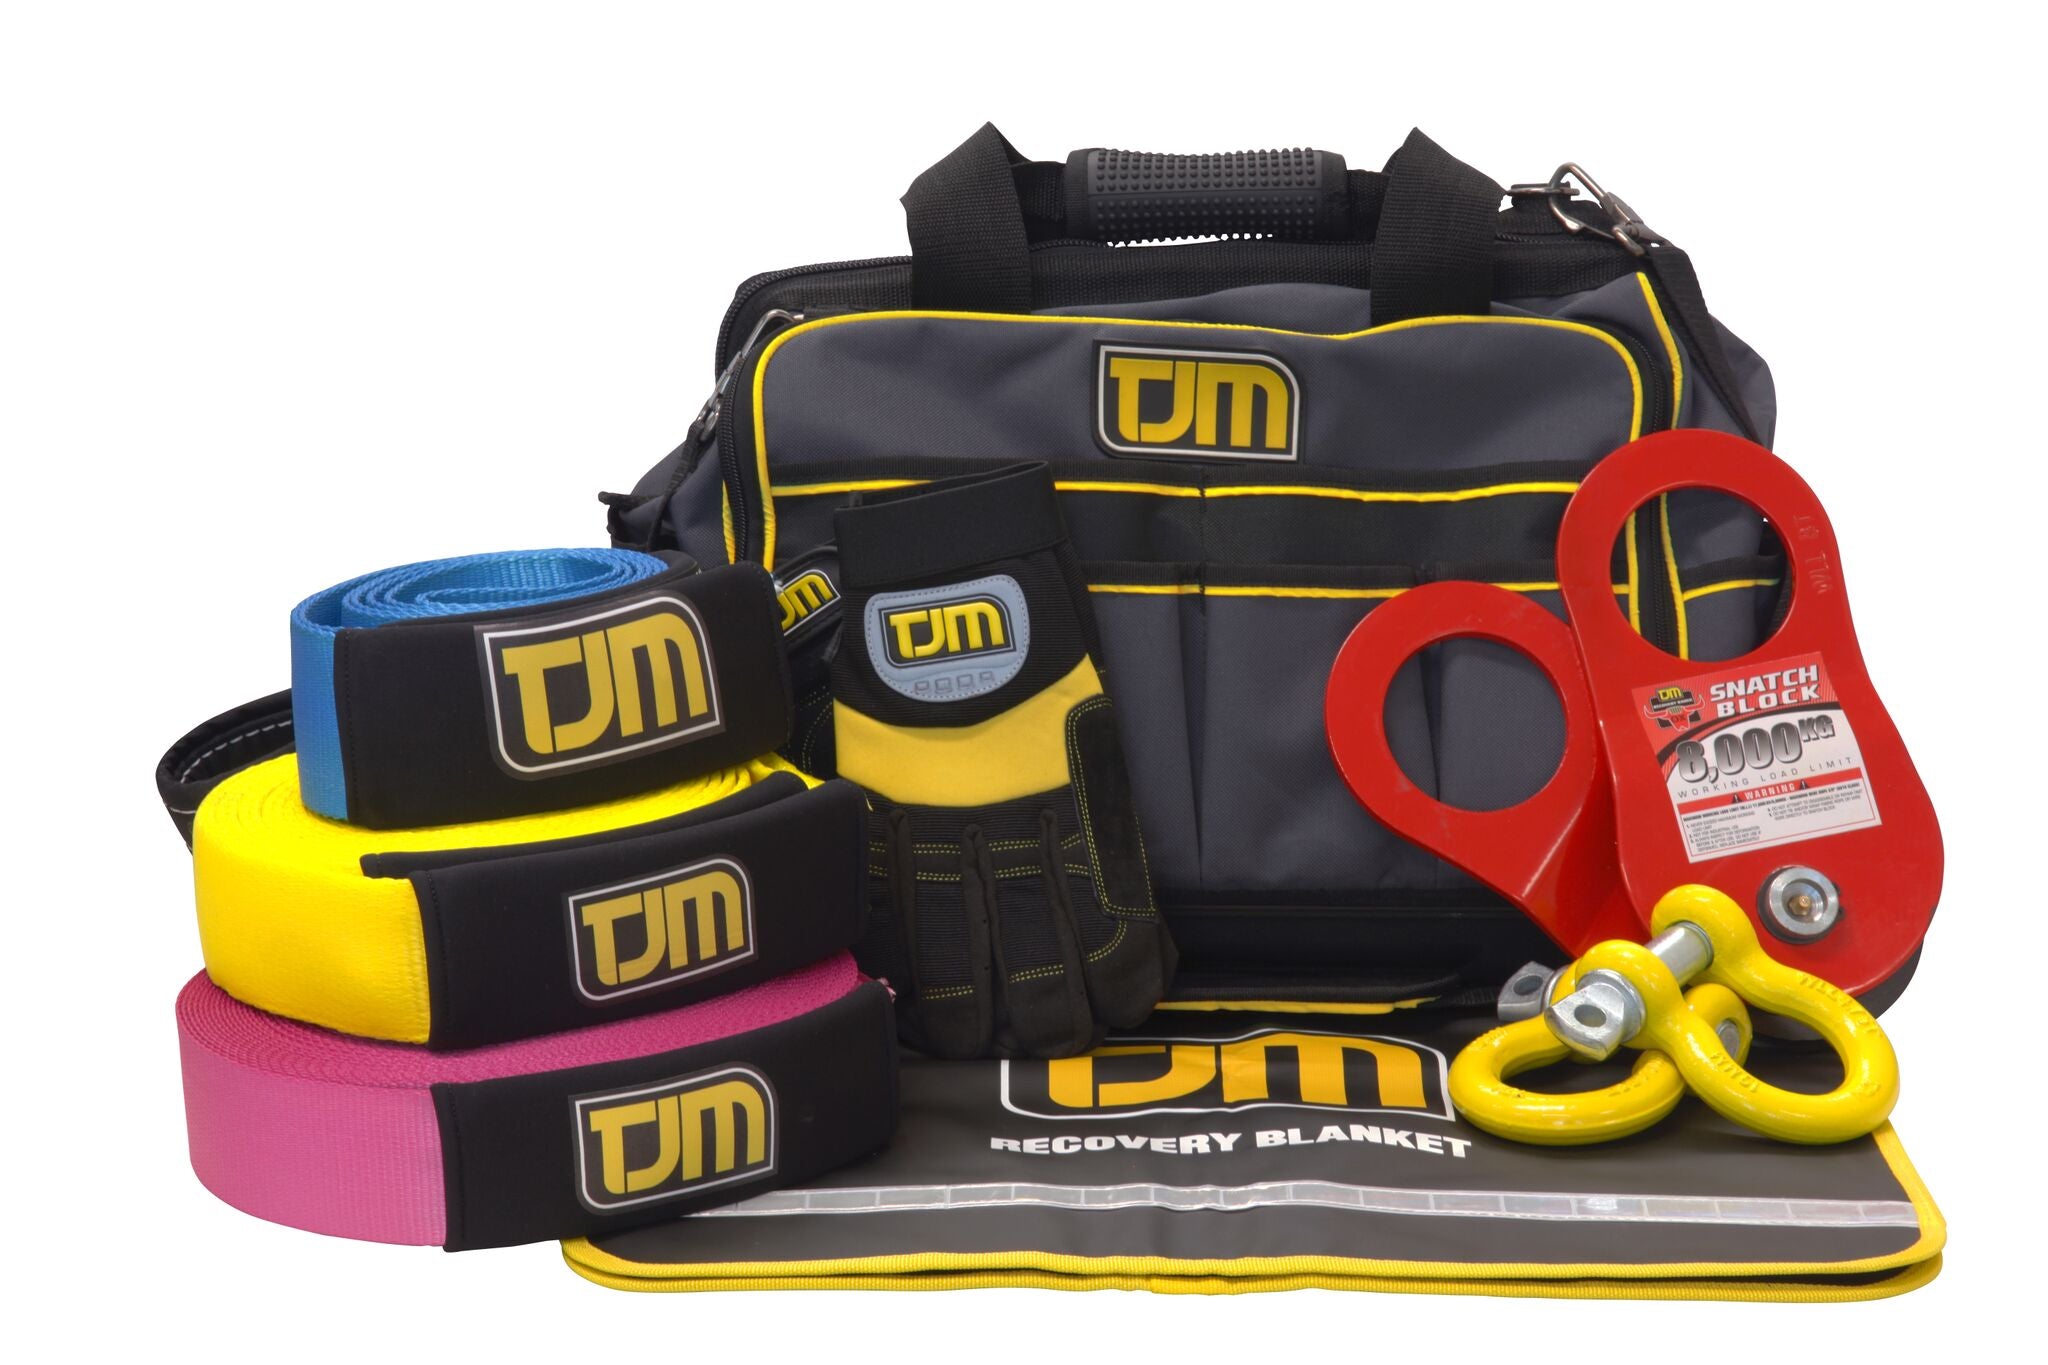 Large Recovery Kit - Includes Bow Shackles, Snatch Strap & More - by TJM